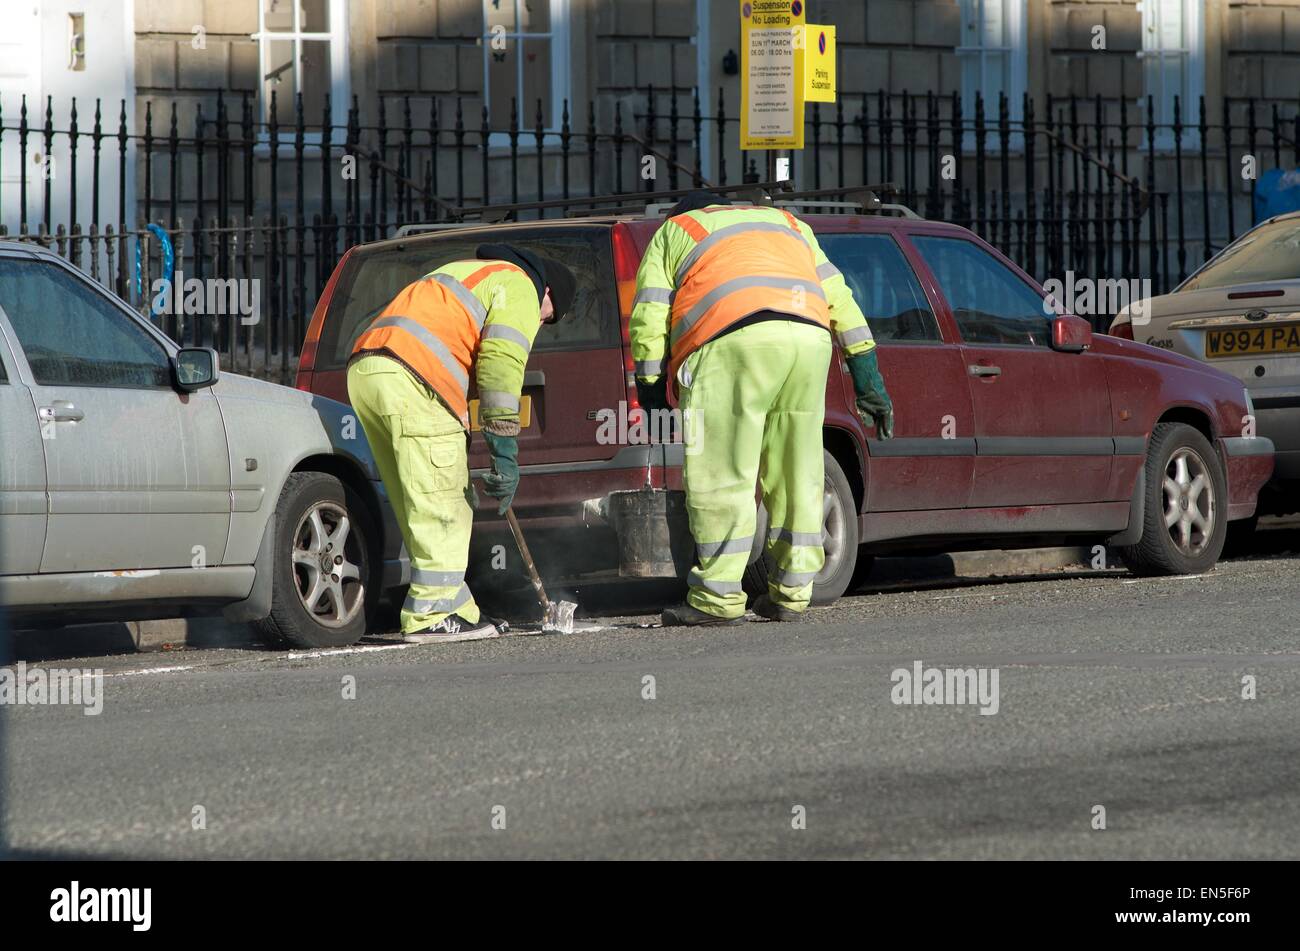 Men Line Painting in Road Stock Photo